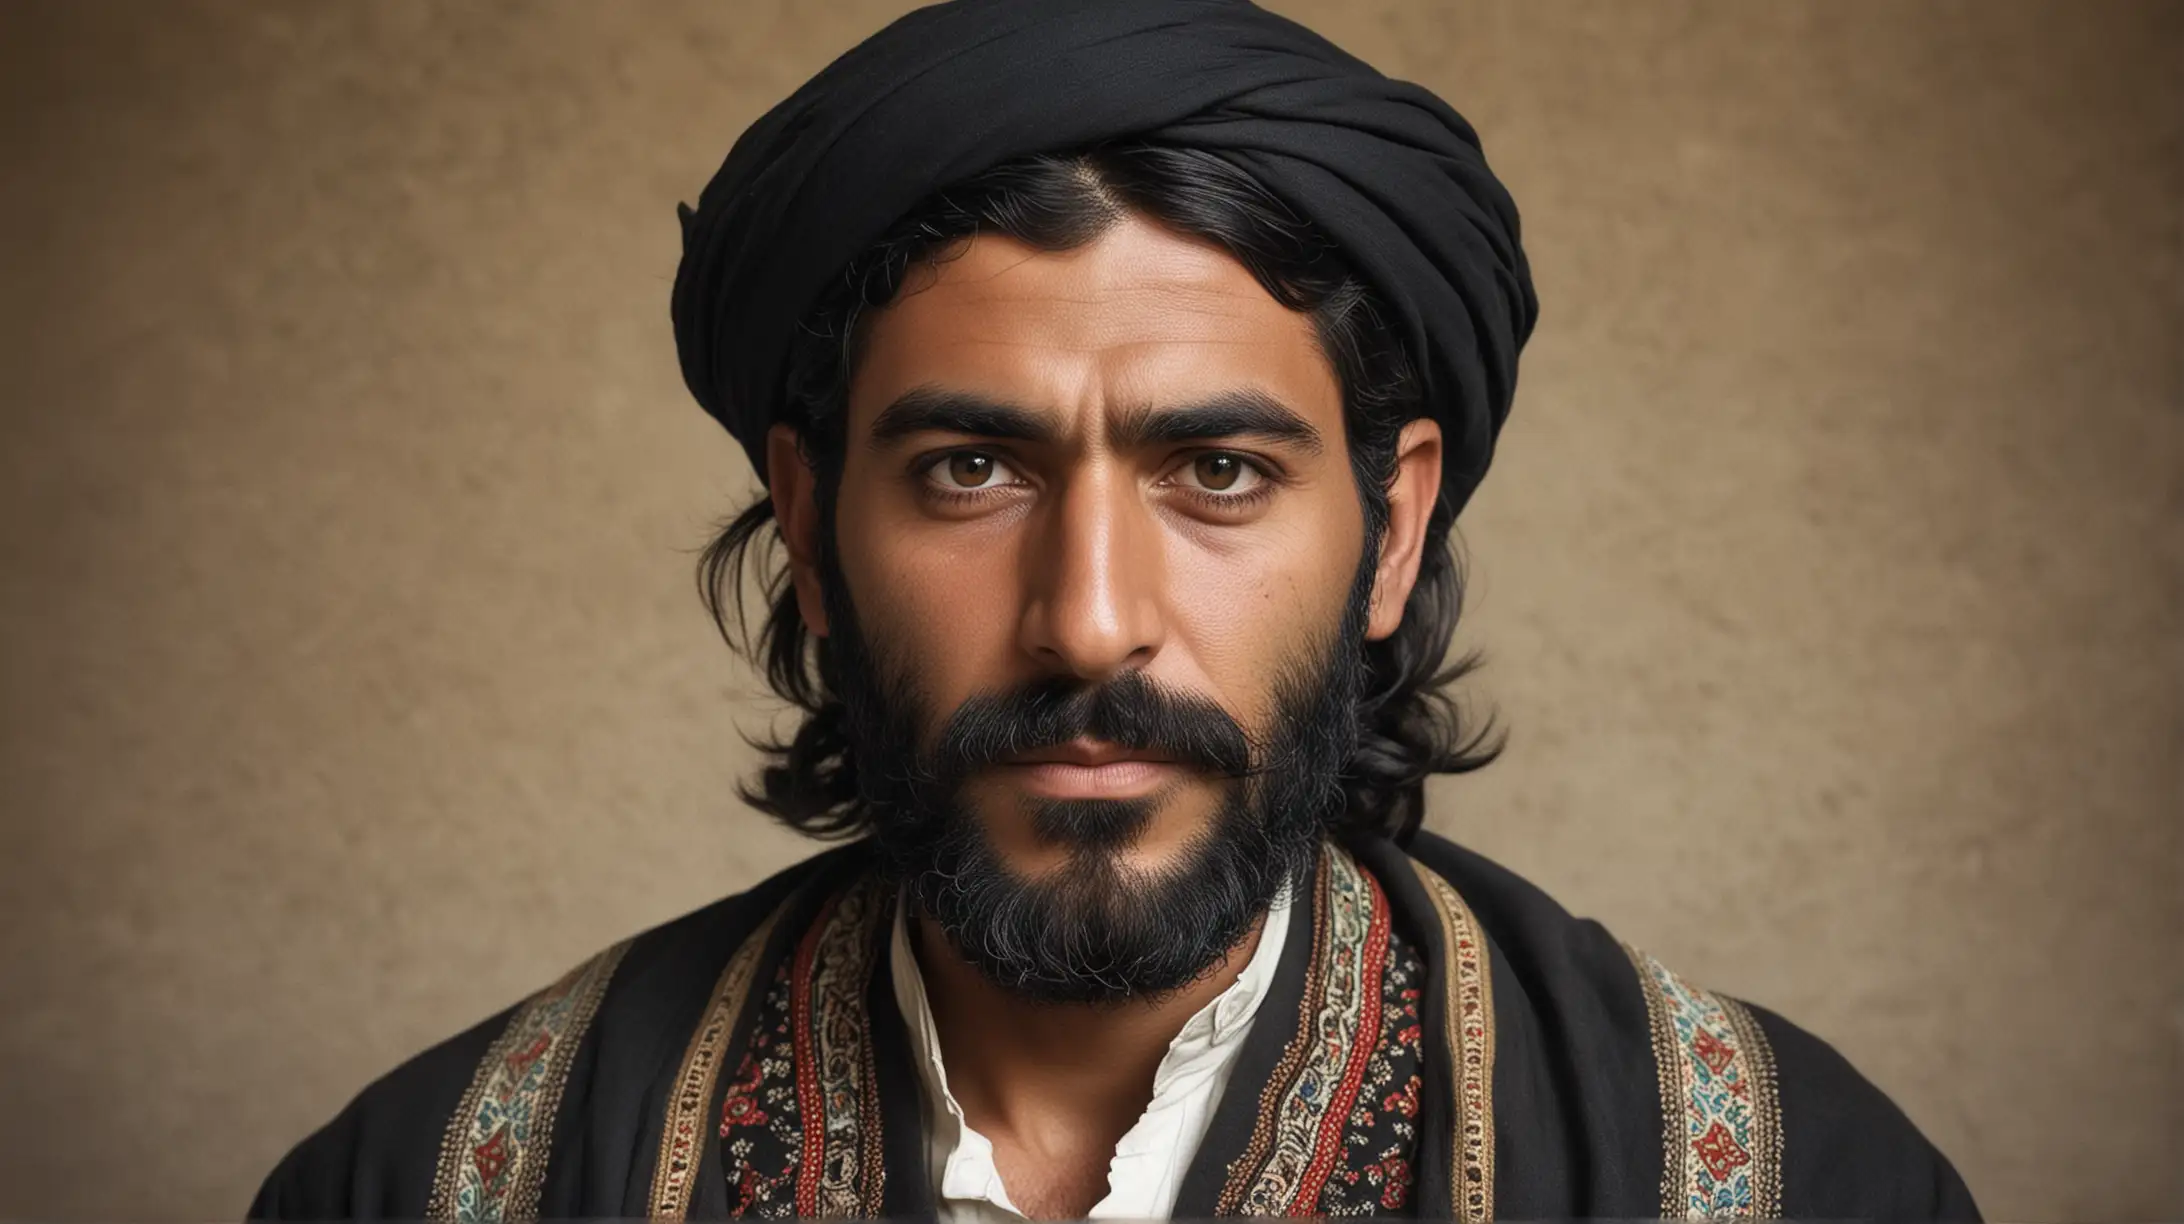 19th century 40 year old Iranian tribal man, with short beard and mustache, long black hair, brave expressions, Iranian dress